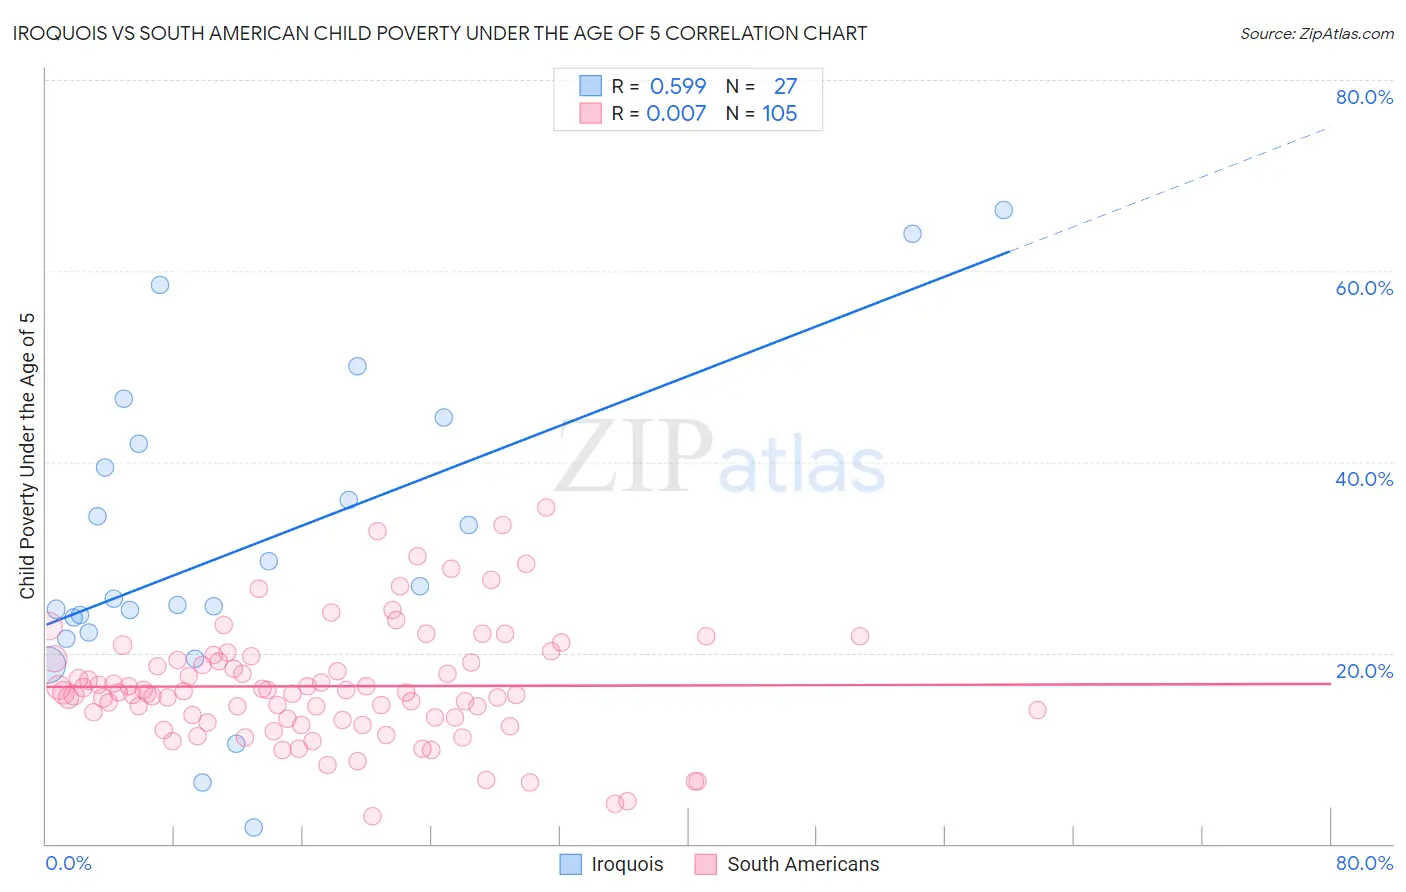 Iroquois vs South American Child Poverty Under the Age of 5